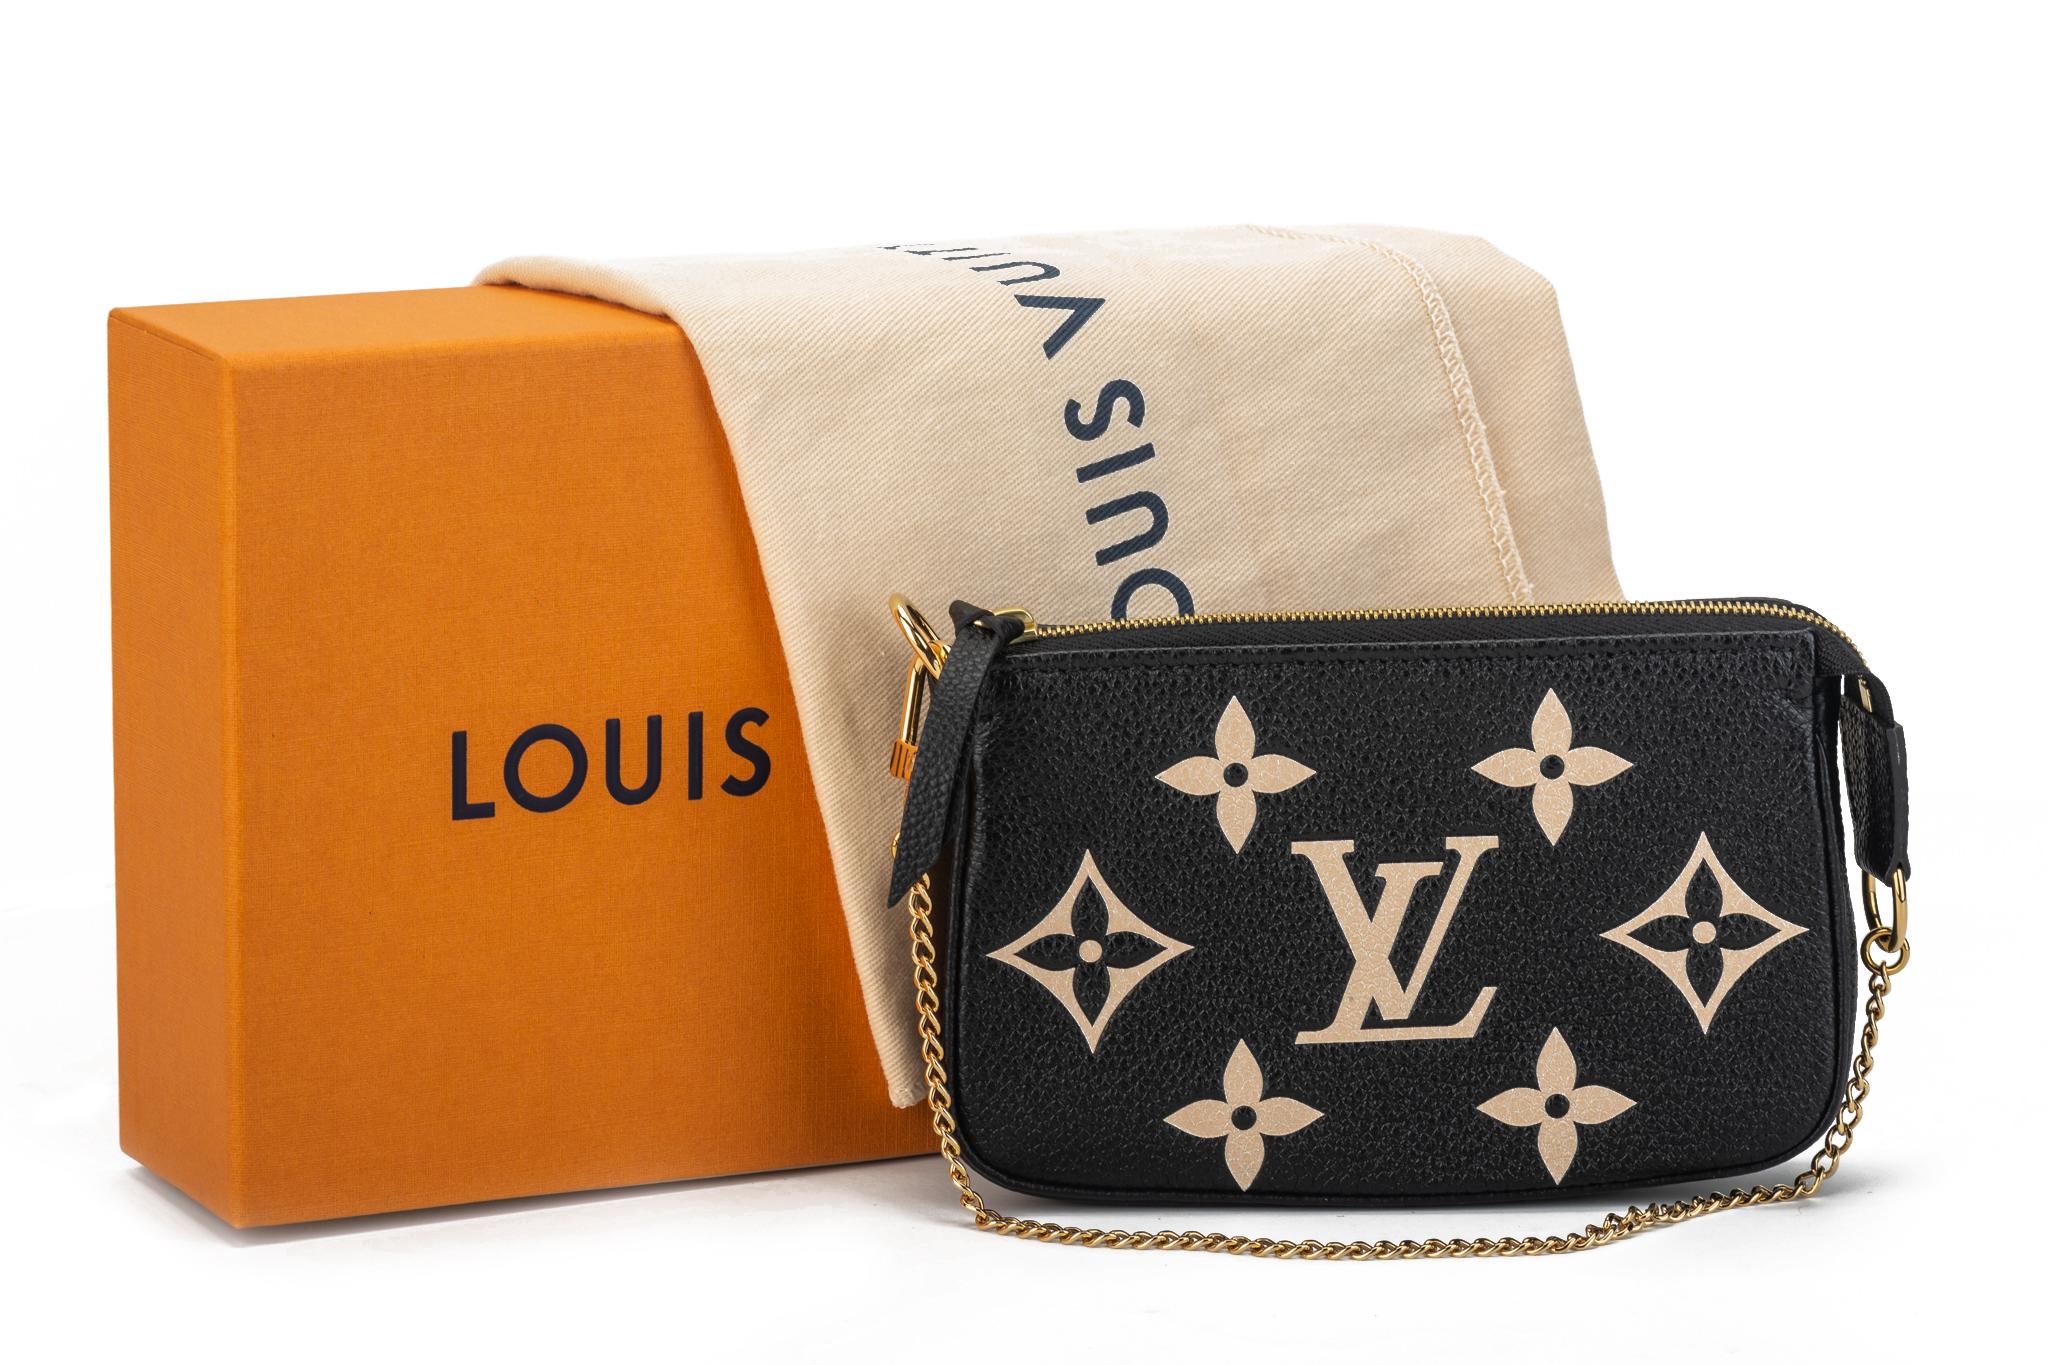 Louis Vuitton mini pochette in black leather with embossed logo in blush, gold tone hardware. Gold tone hardware chain. Brand new with original dust cover and box.
